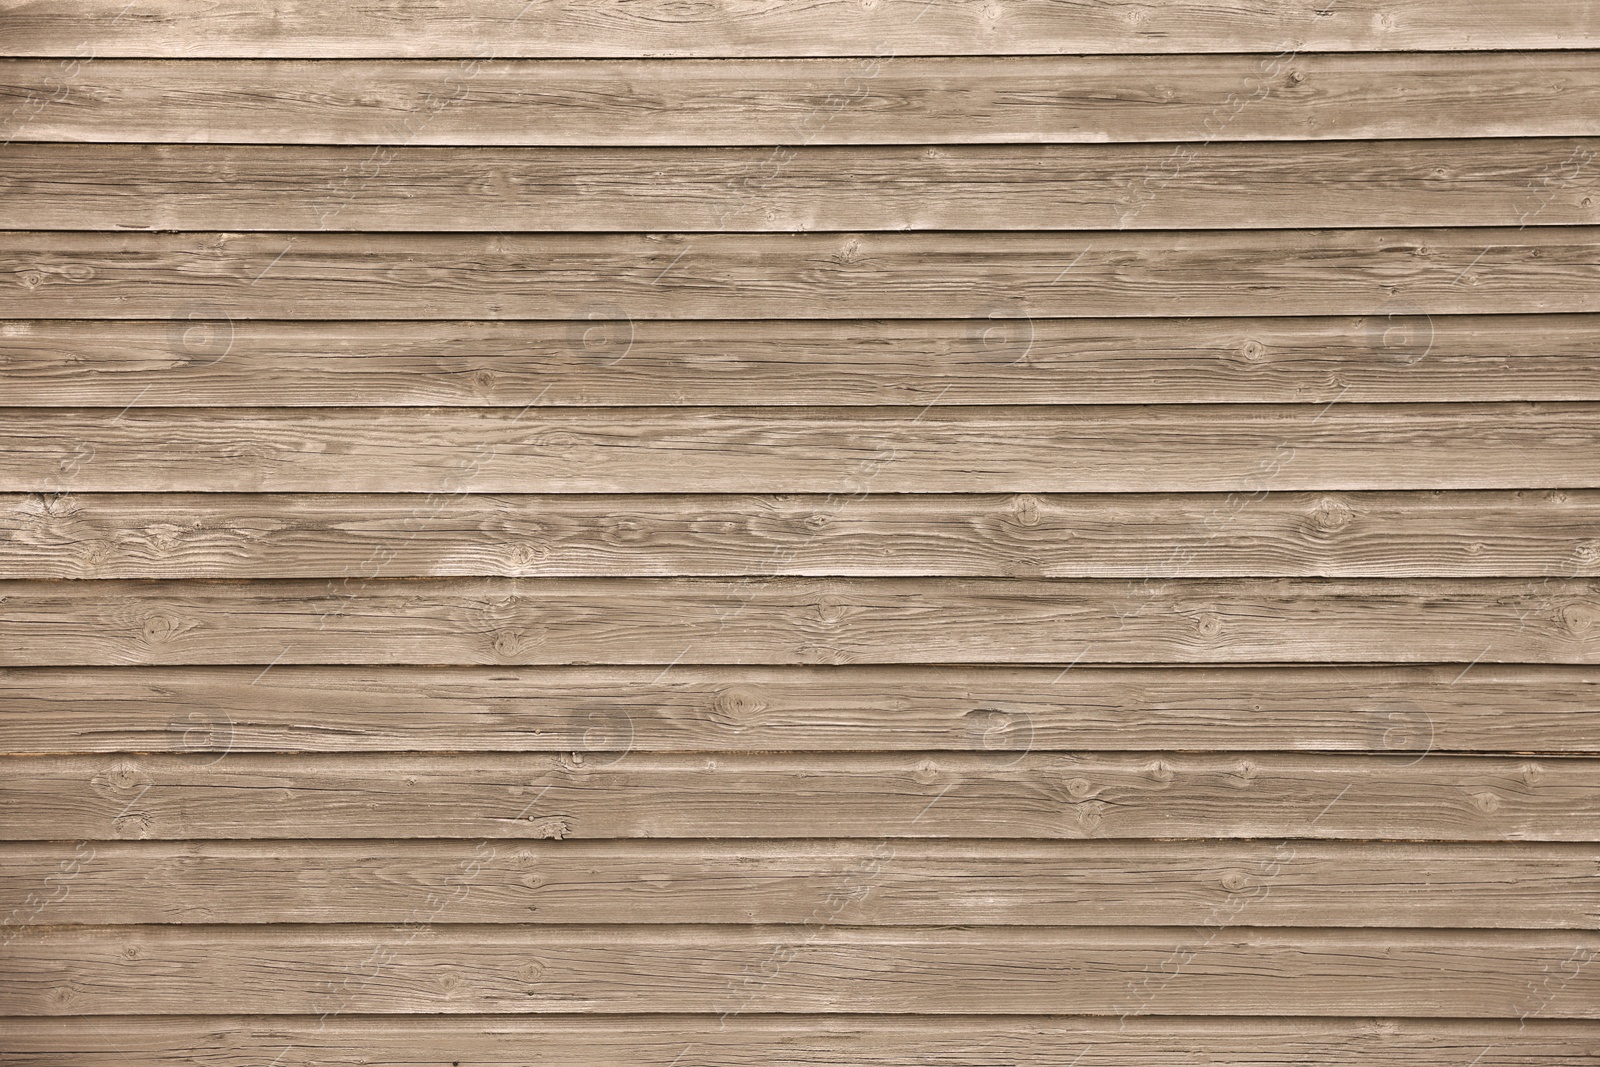 Photo of Texture of old wooden surface as background